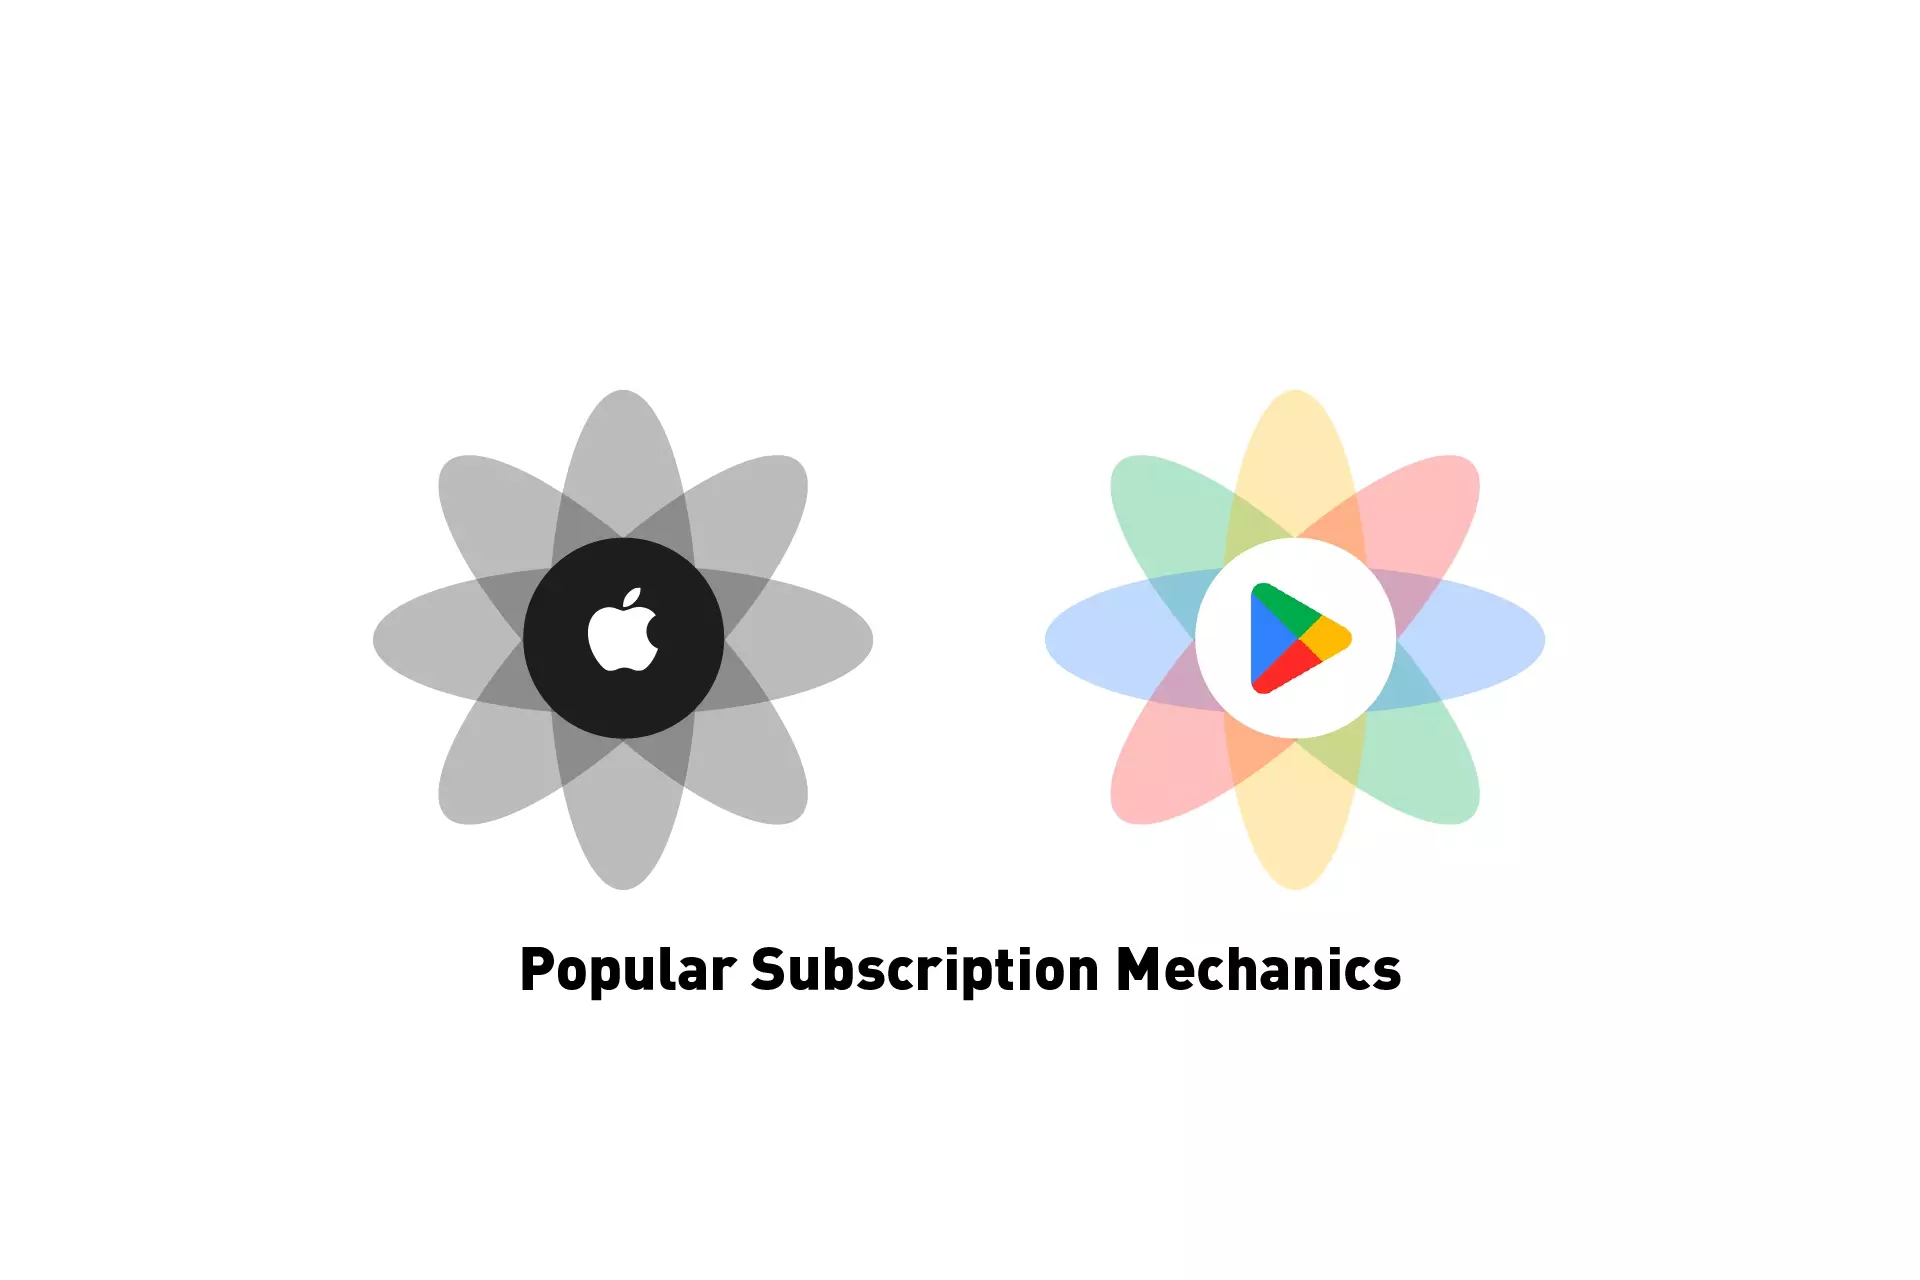 Two flowers that represent Apple and the Google Play Store. Beneath them sits the text "Popular Subscription Mechanics."